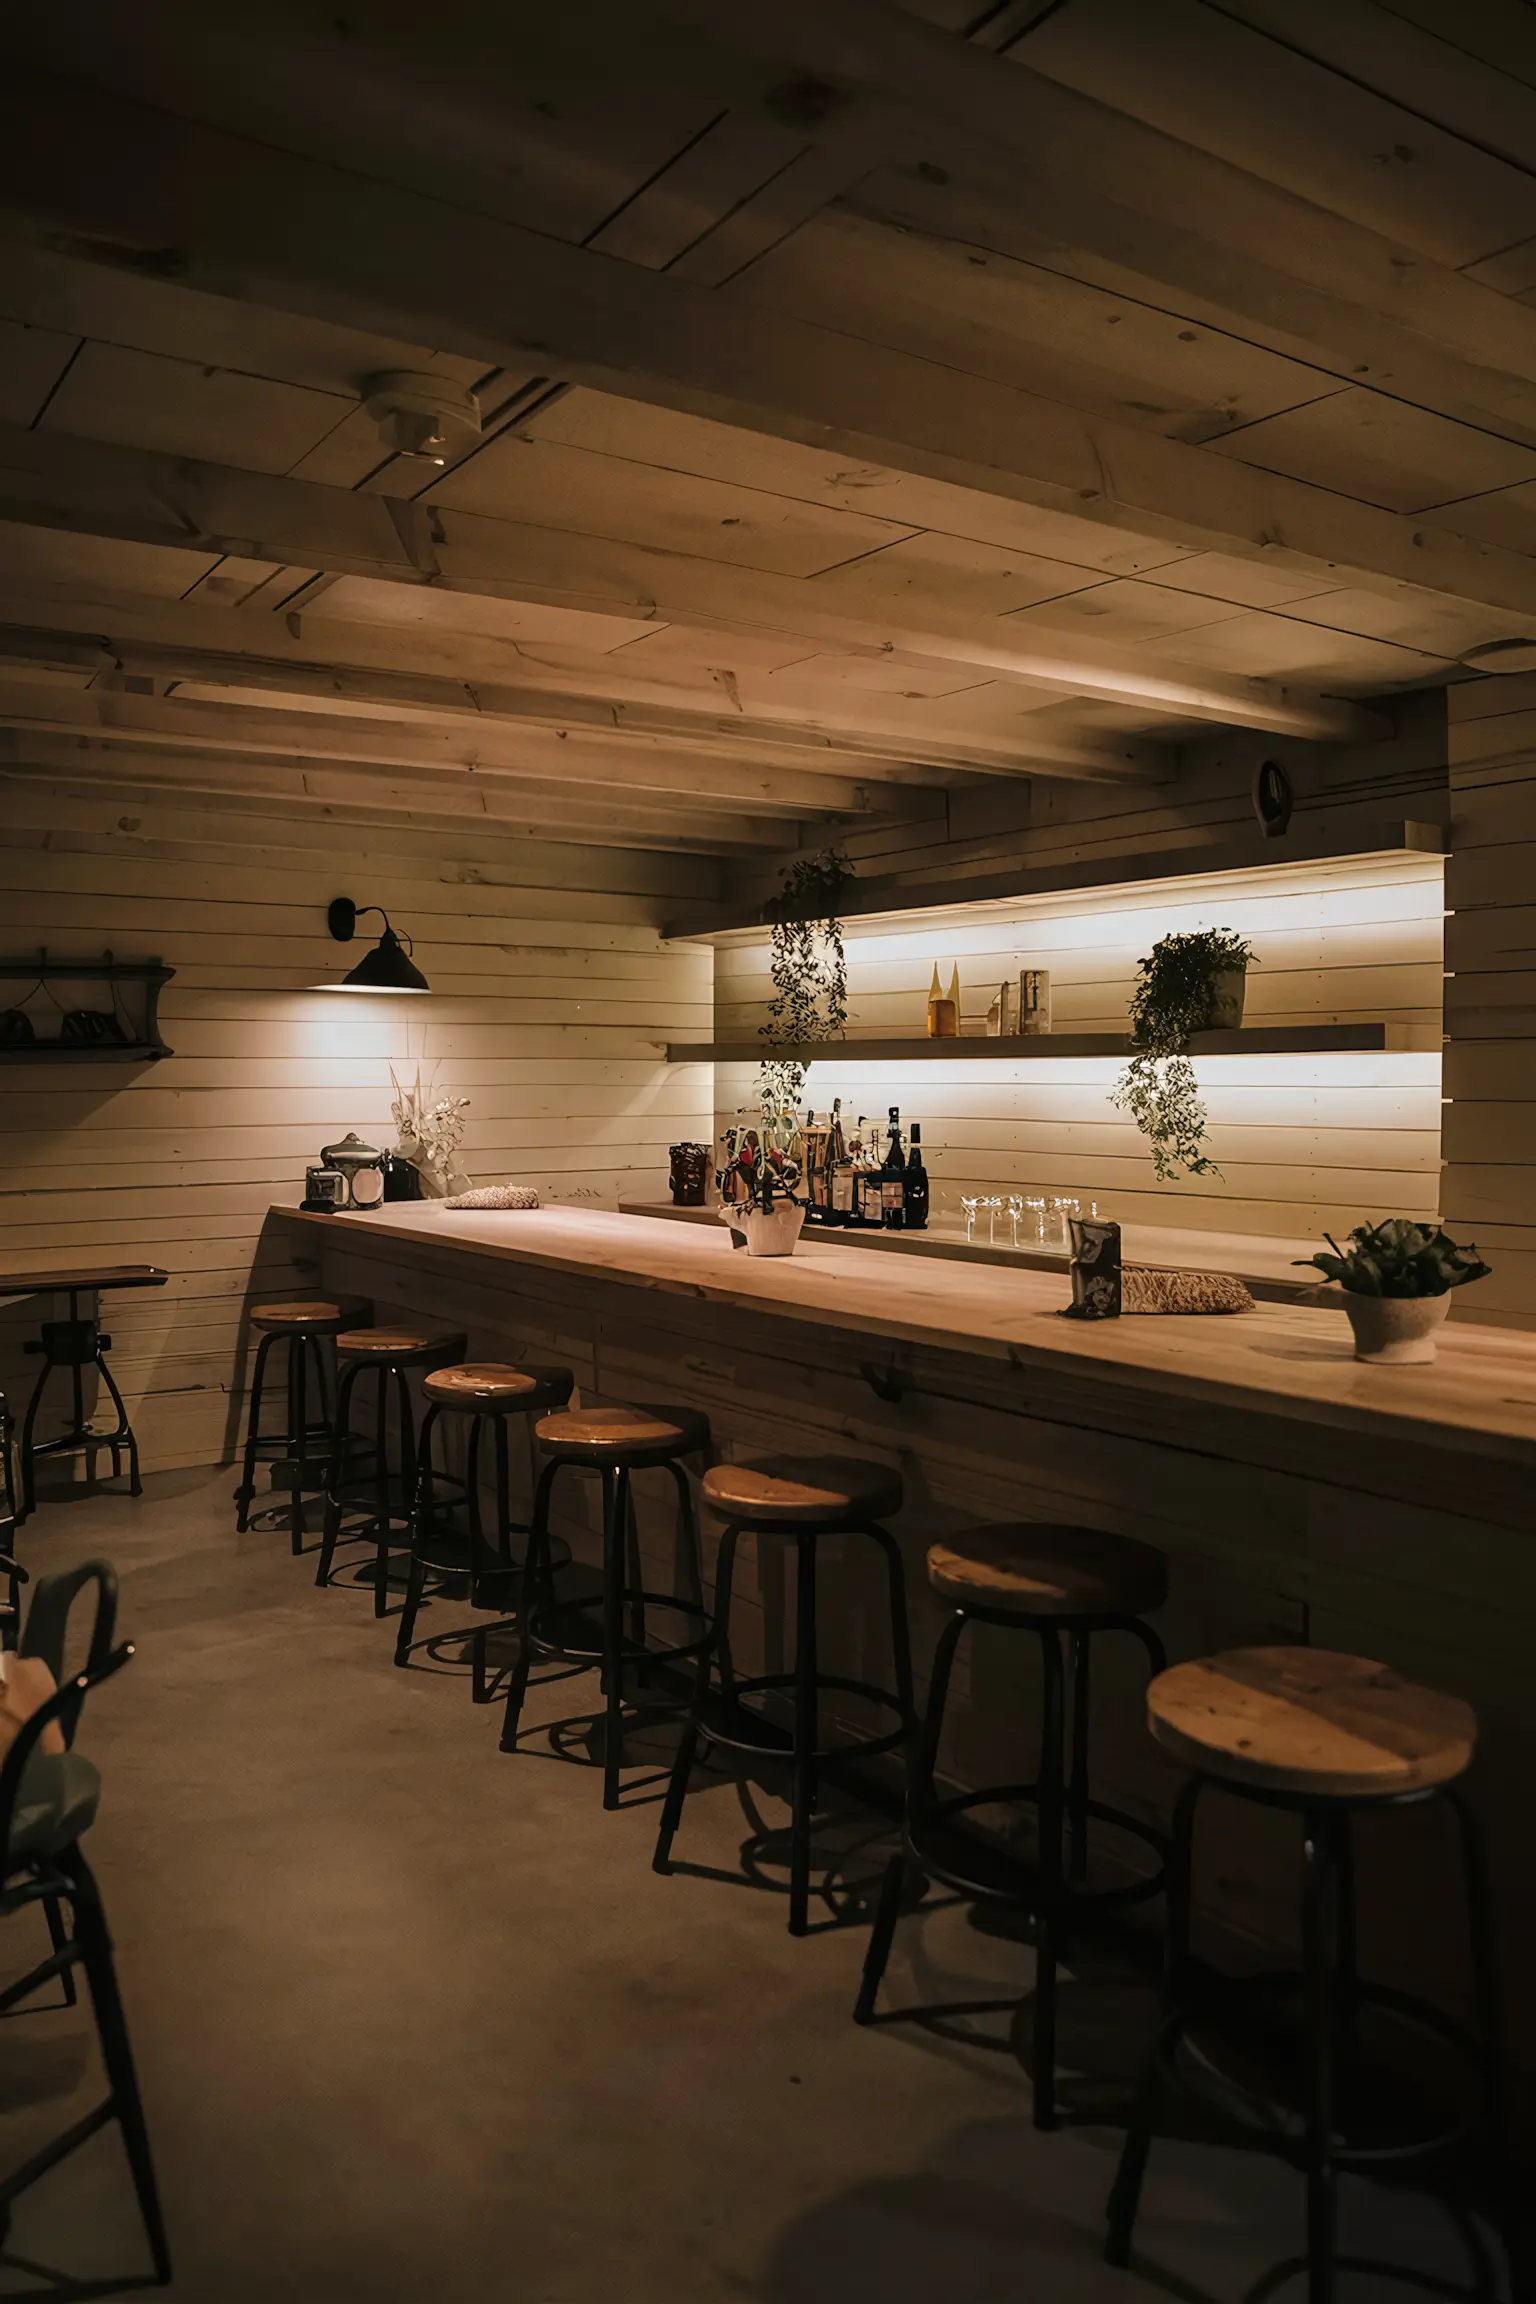 Farmhouse-style basement bar with shiplap walls and rustic decor.